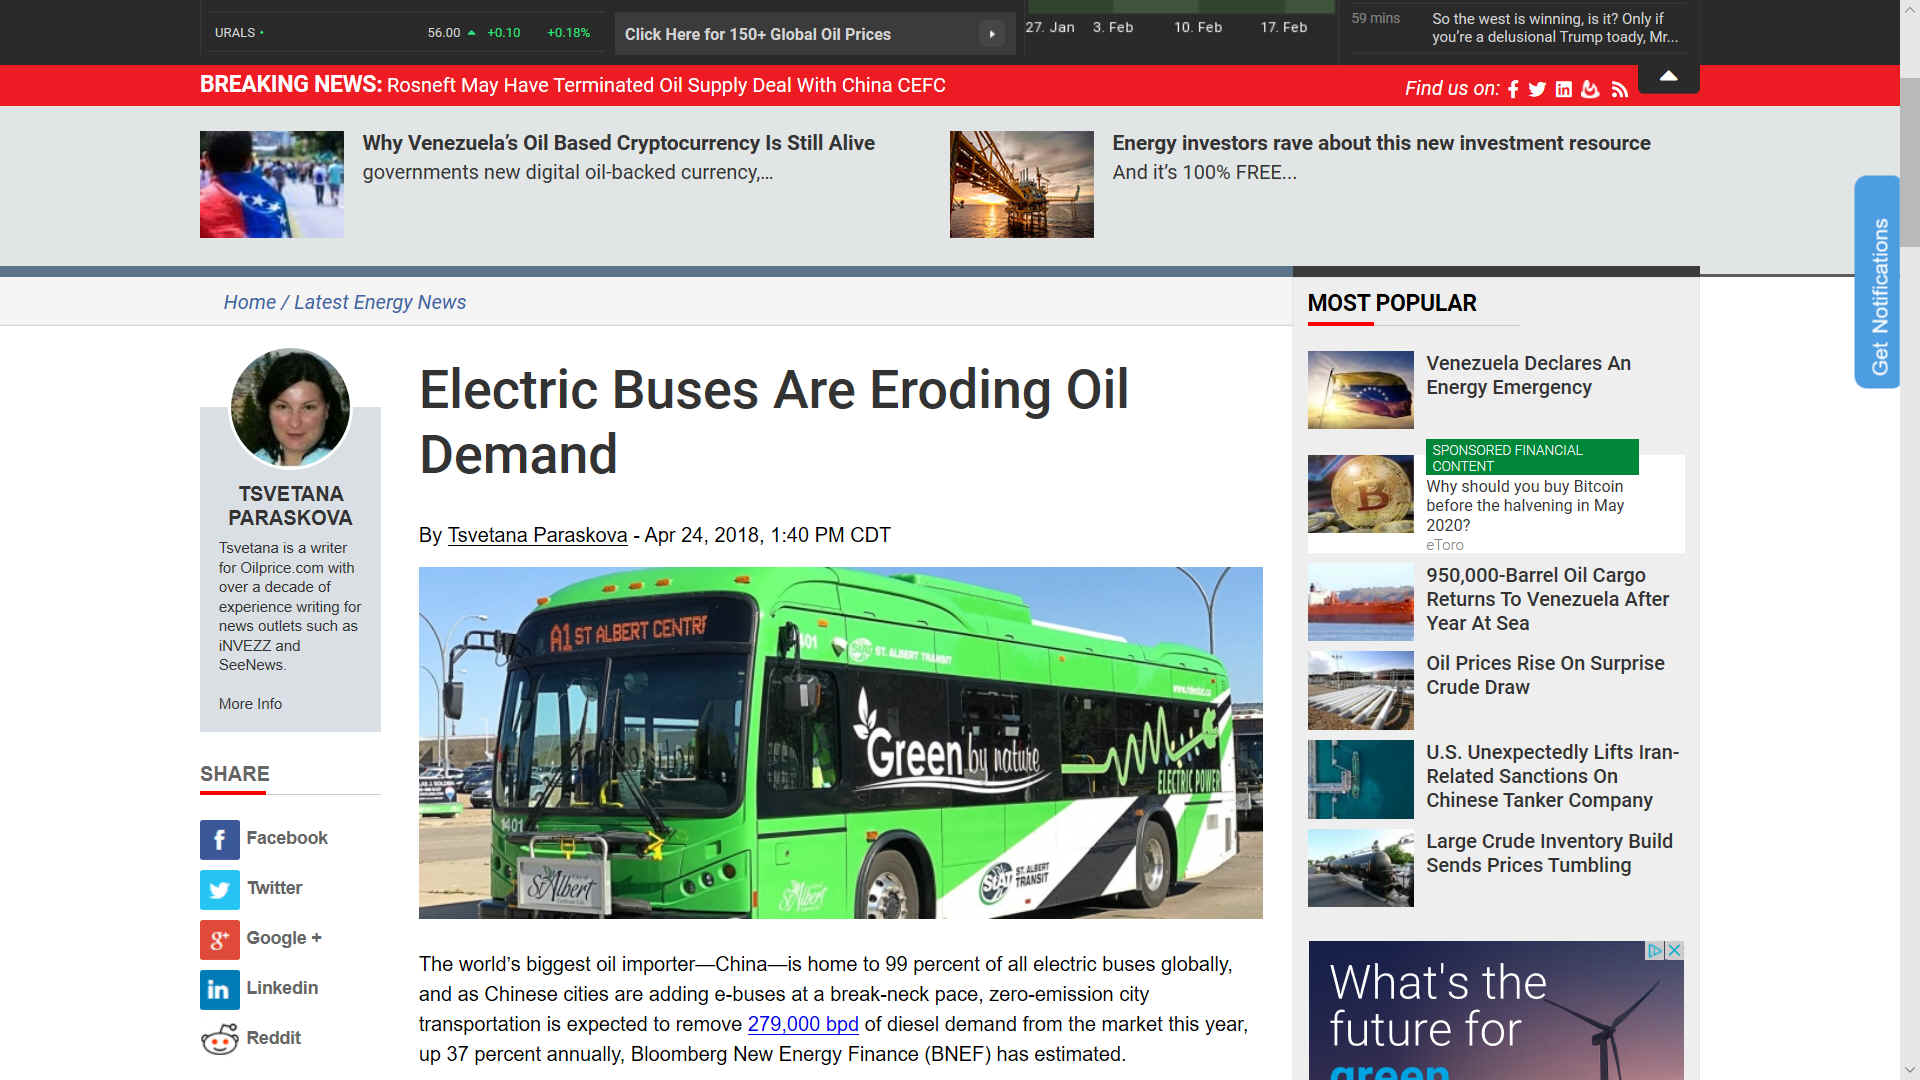 BYD electric buses in China